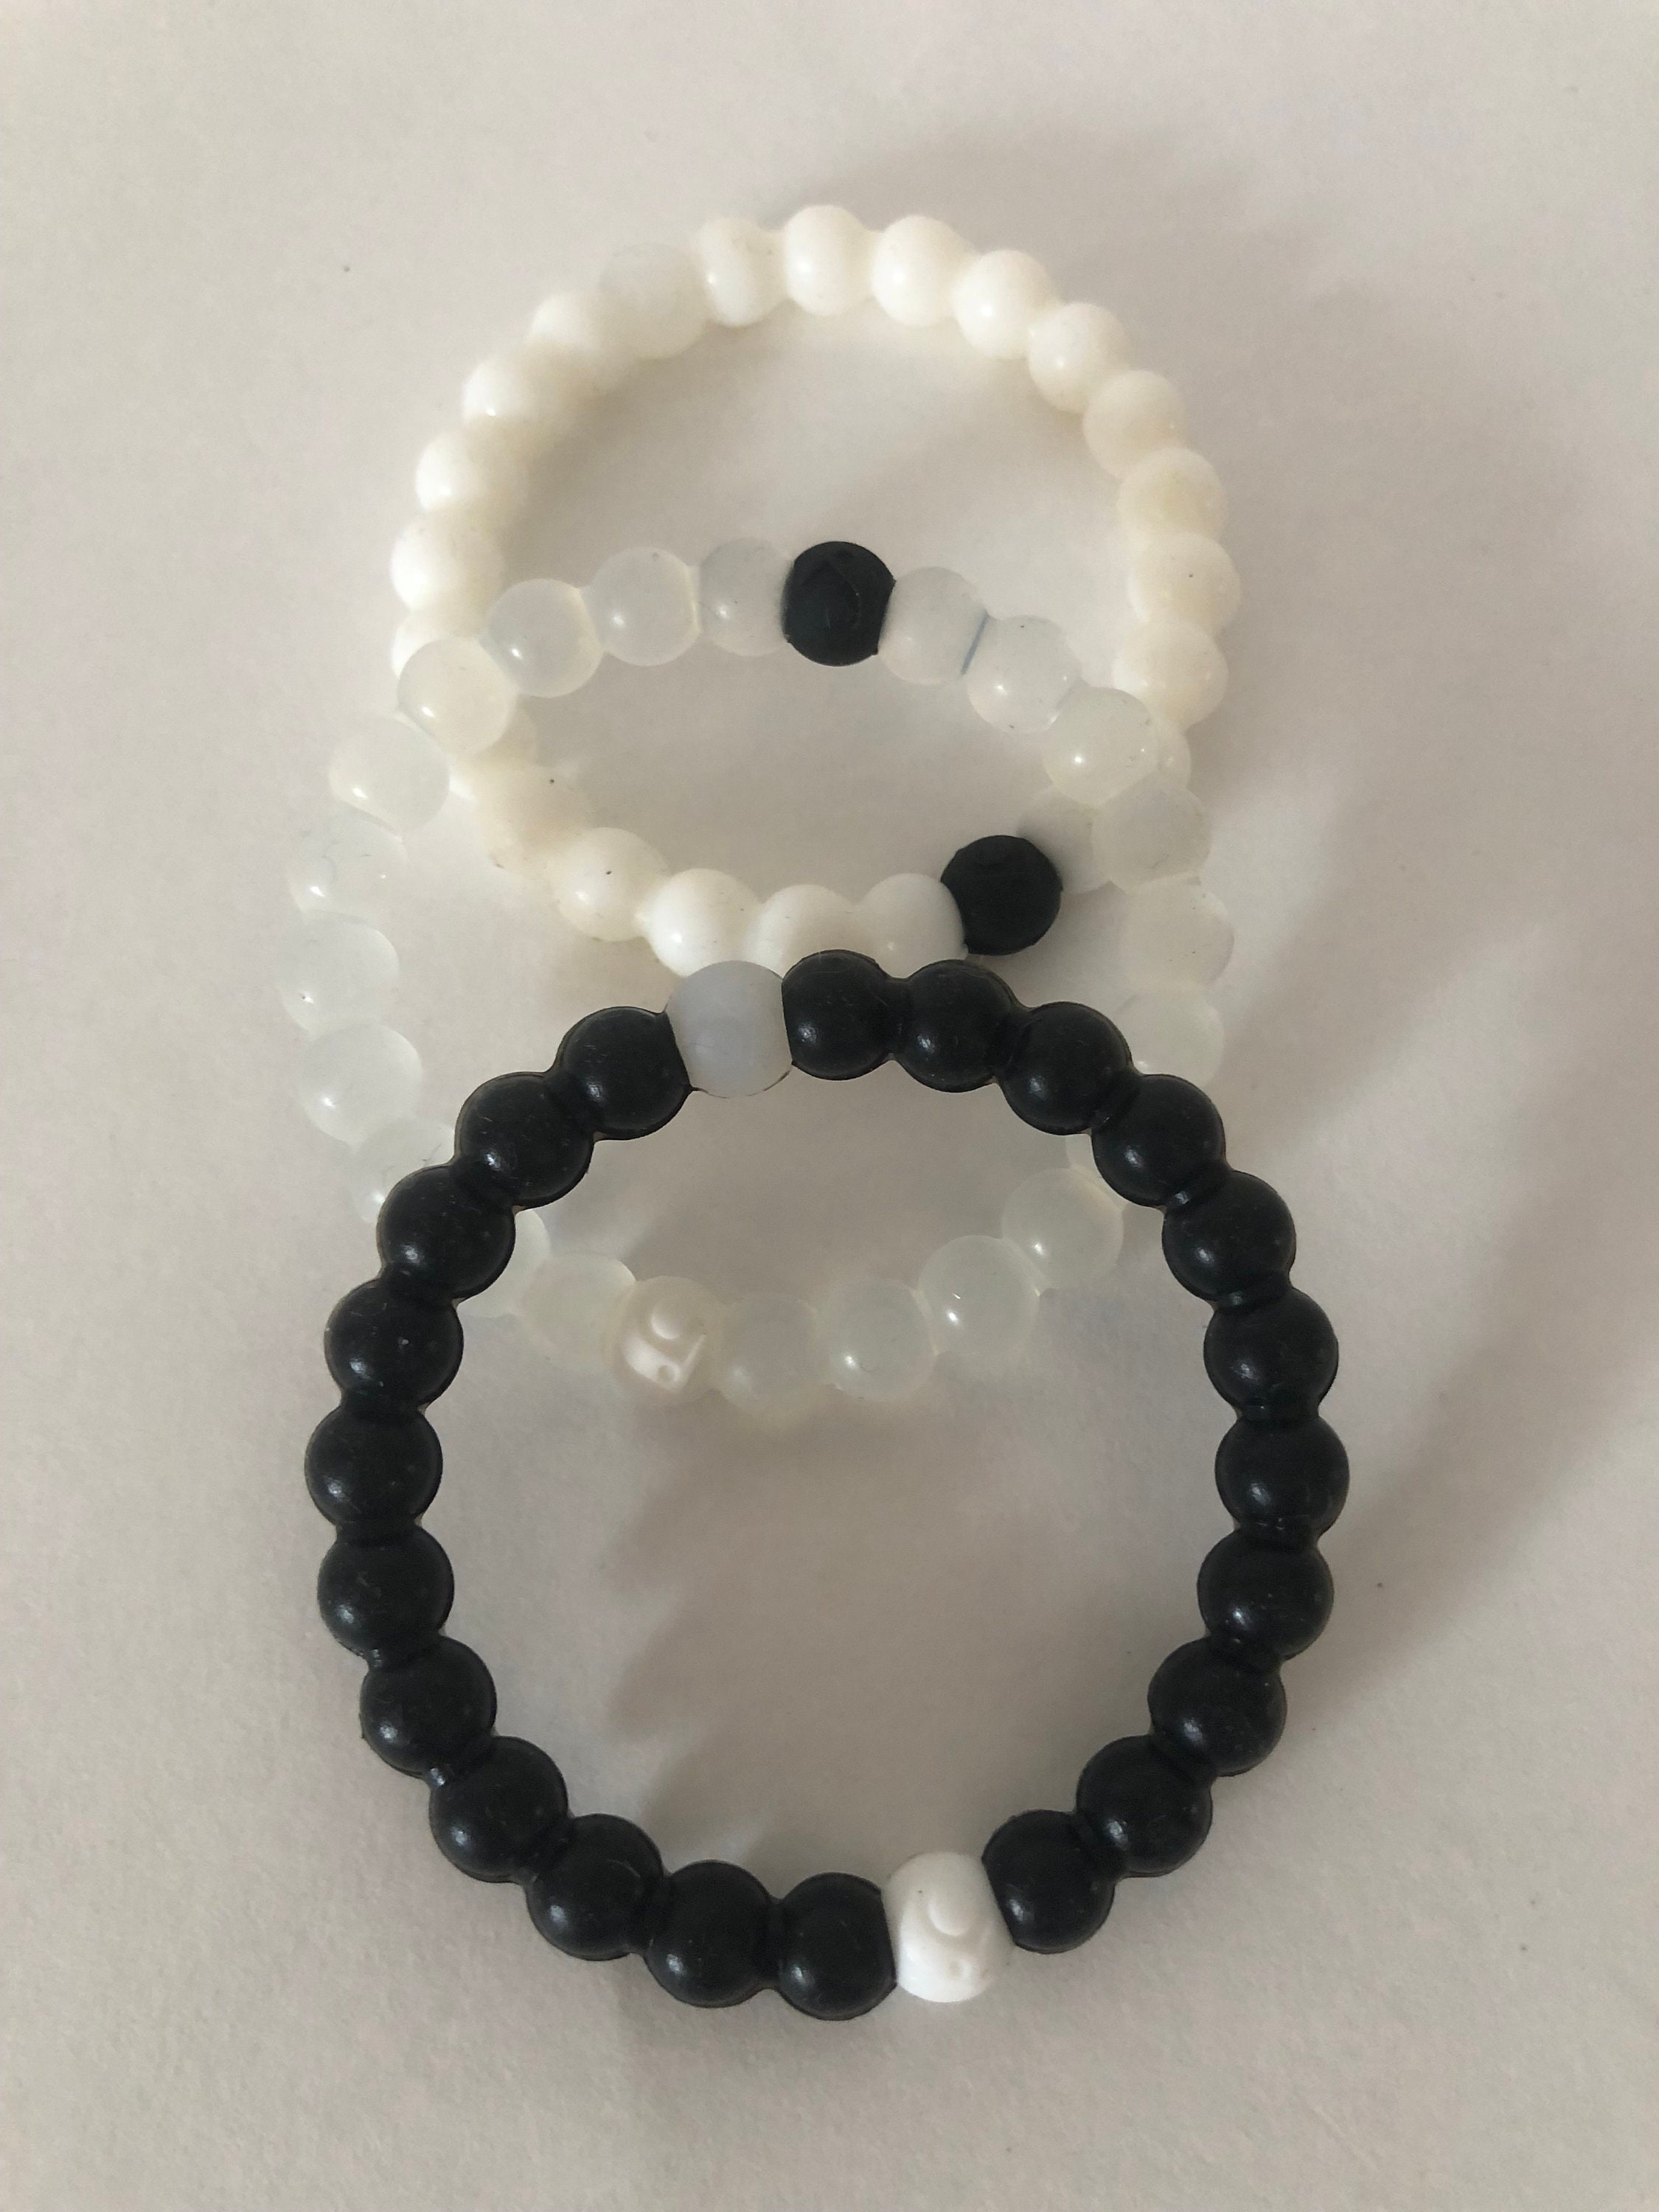 Meet Lokai, the Inspirational Bracelets Brand Donating Millions to Causes  Around the World - Causeartist